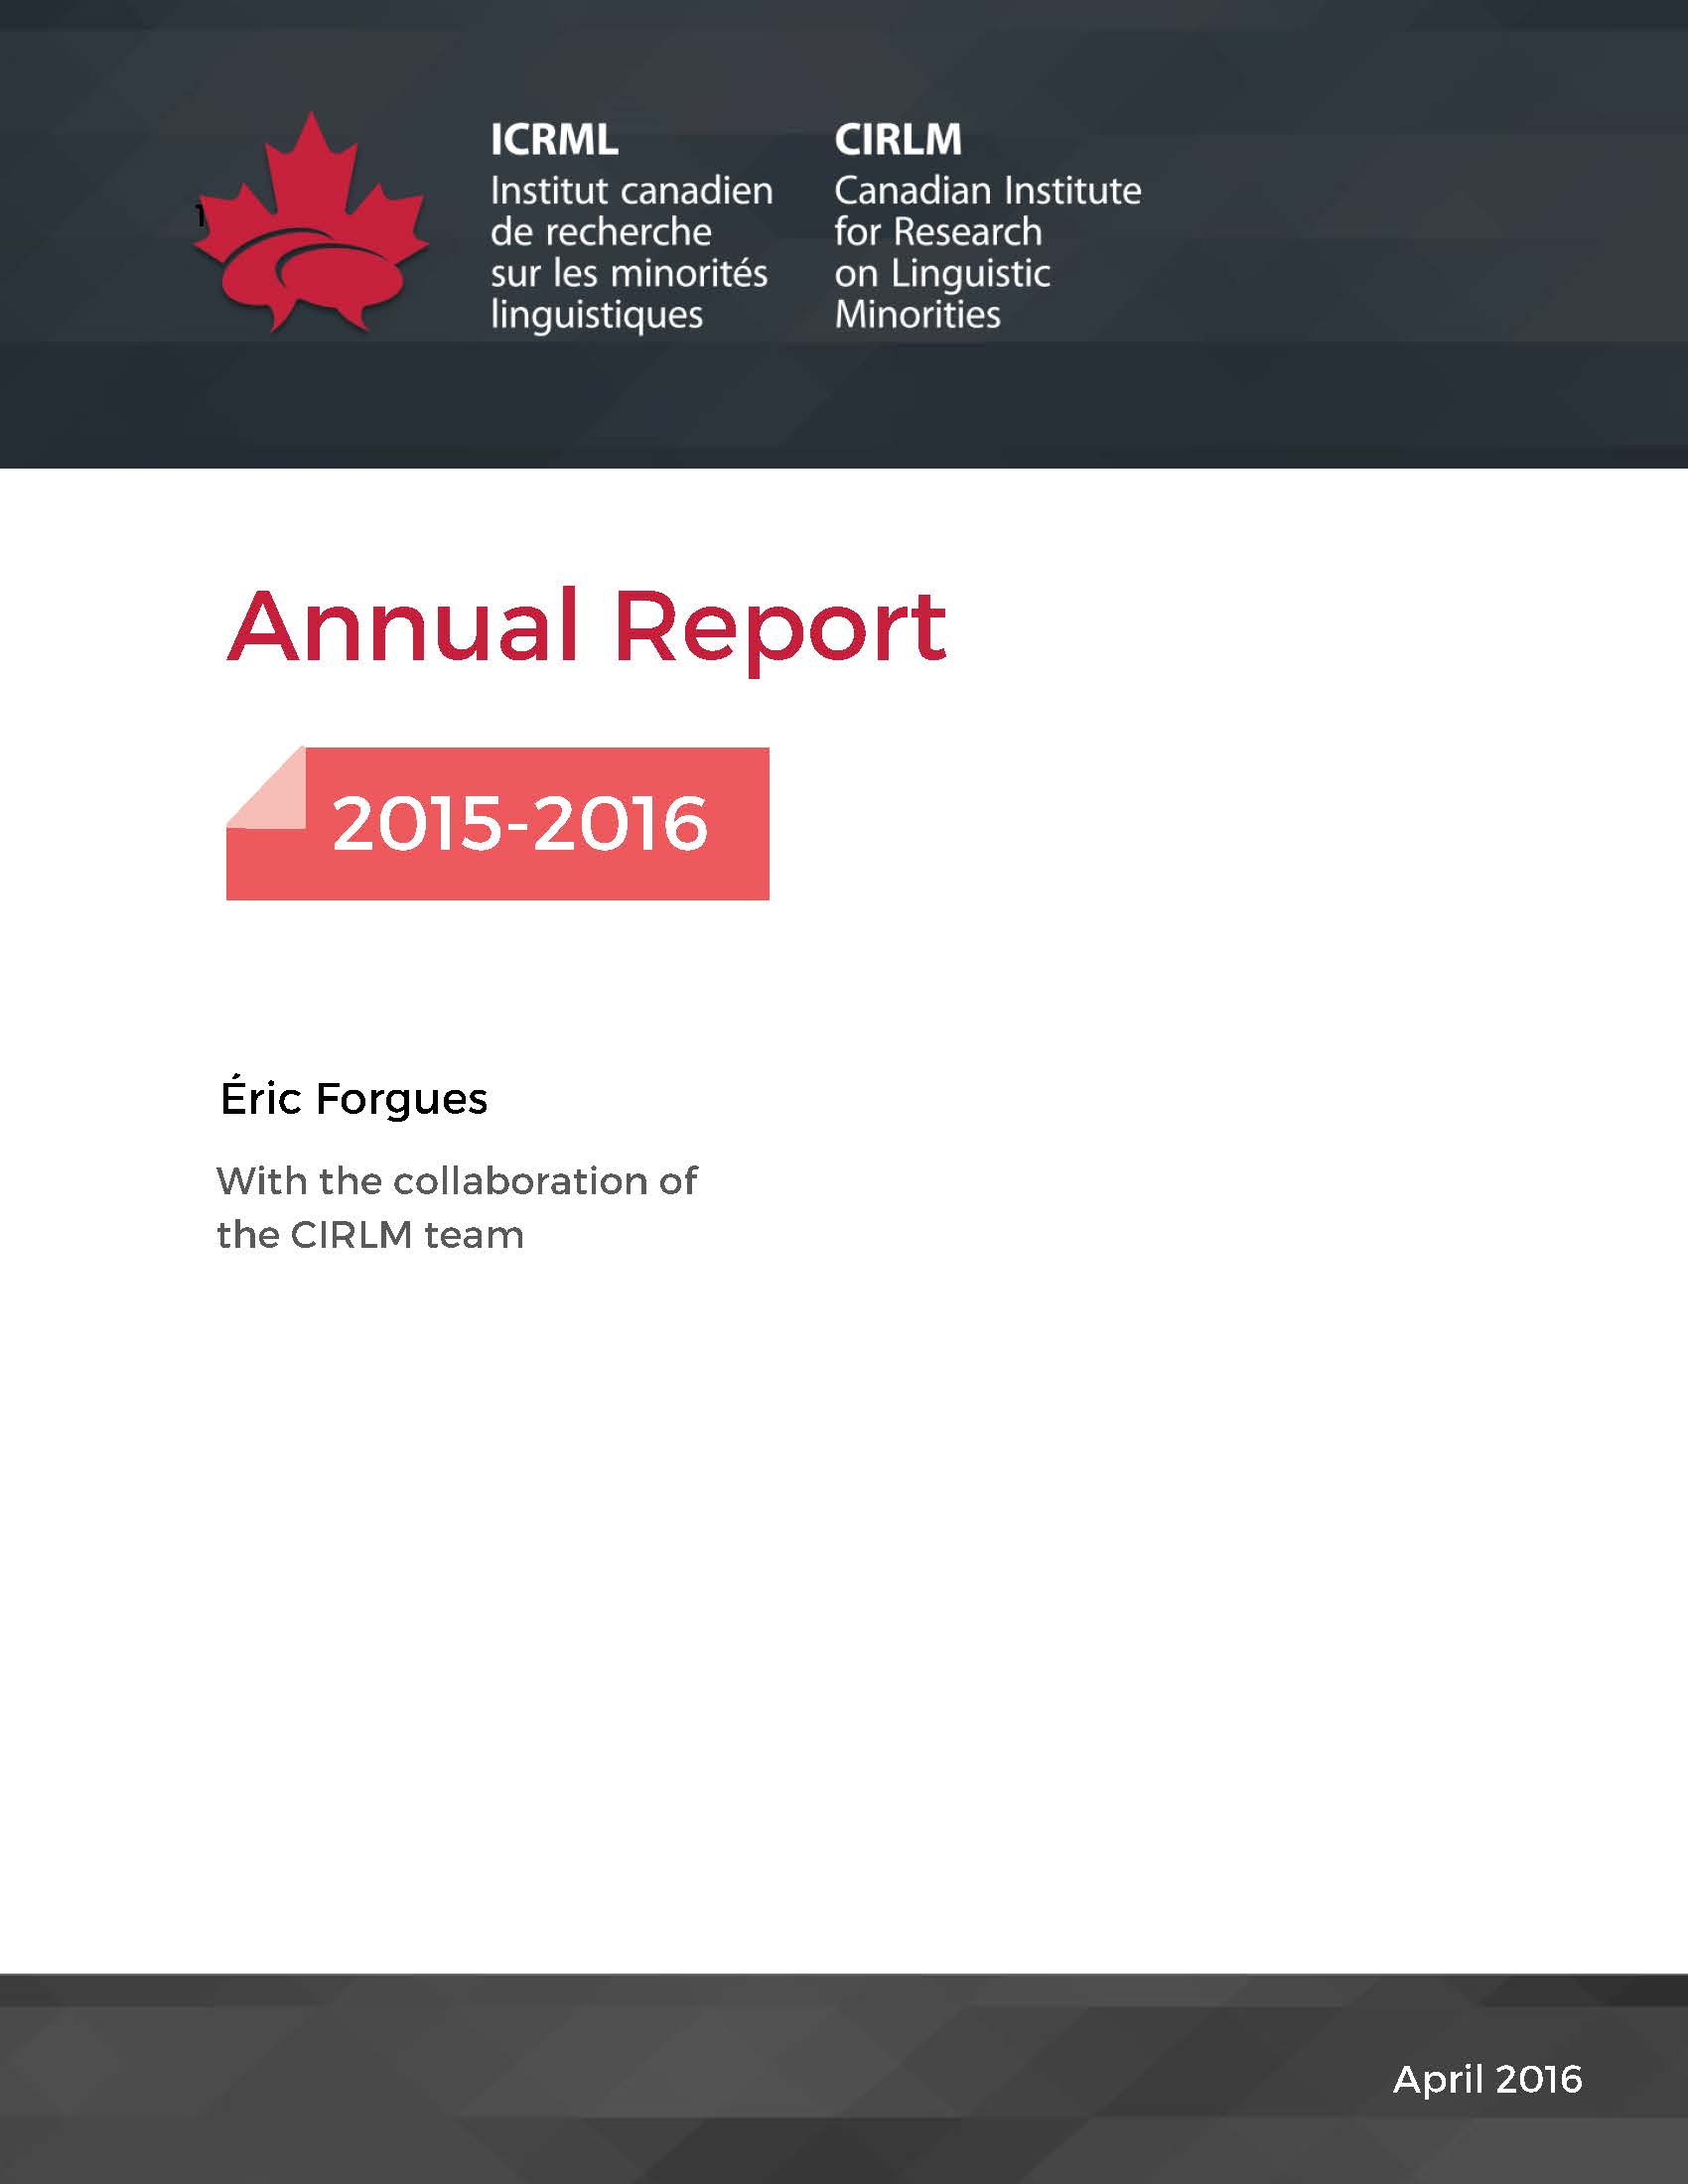 Pages de Cover annual report 2015 2016